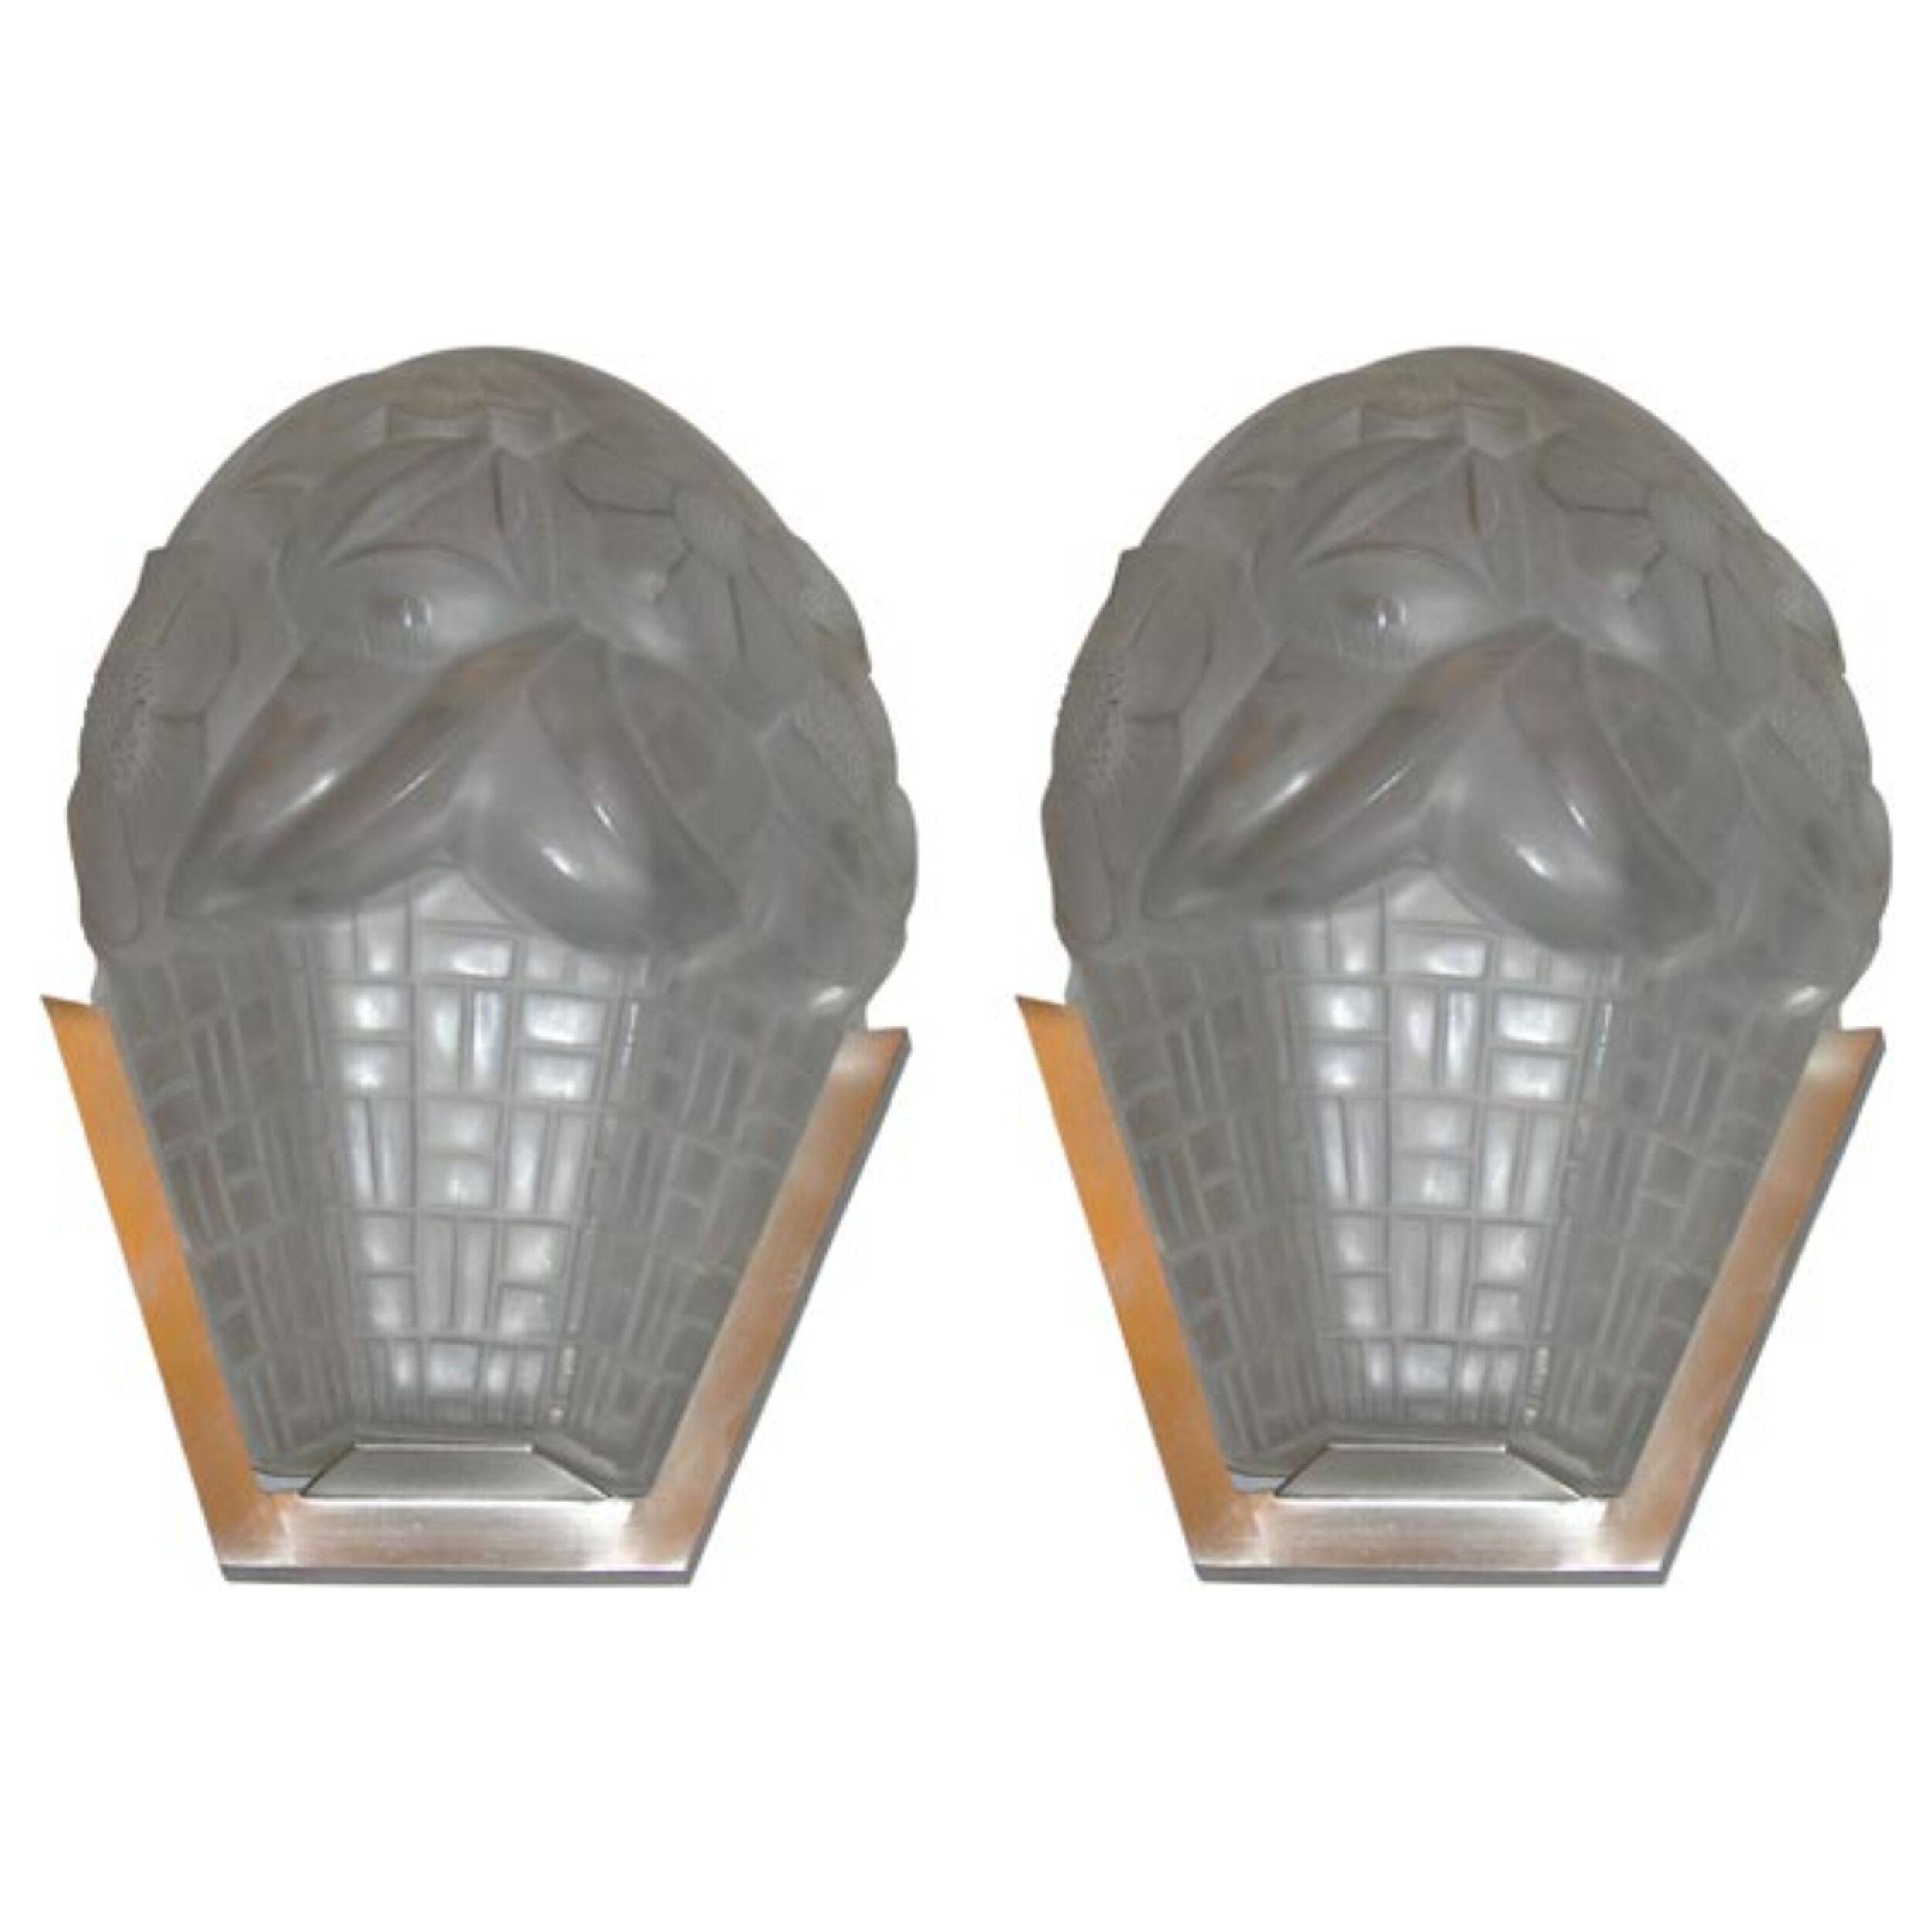 Signed French Art Deco Wall Sconces by Degue